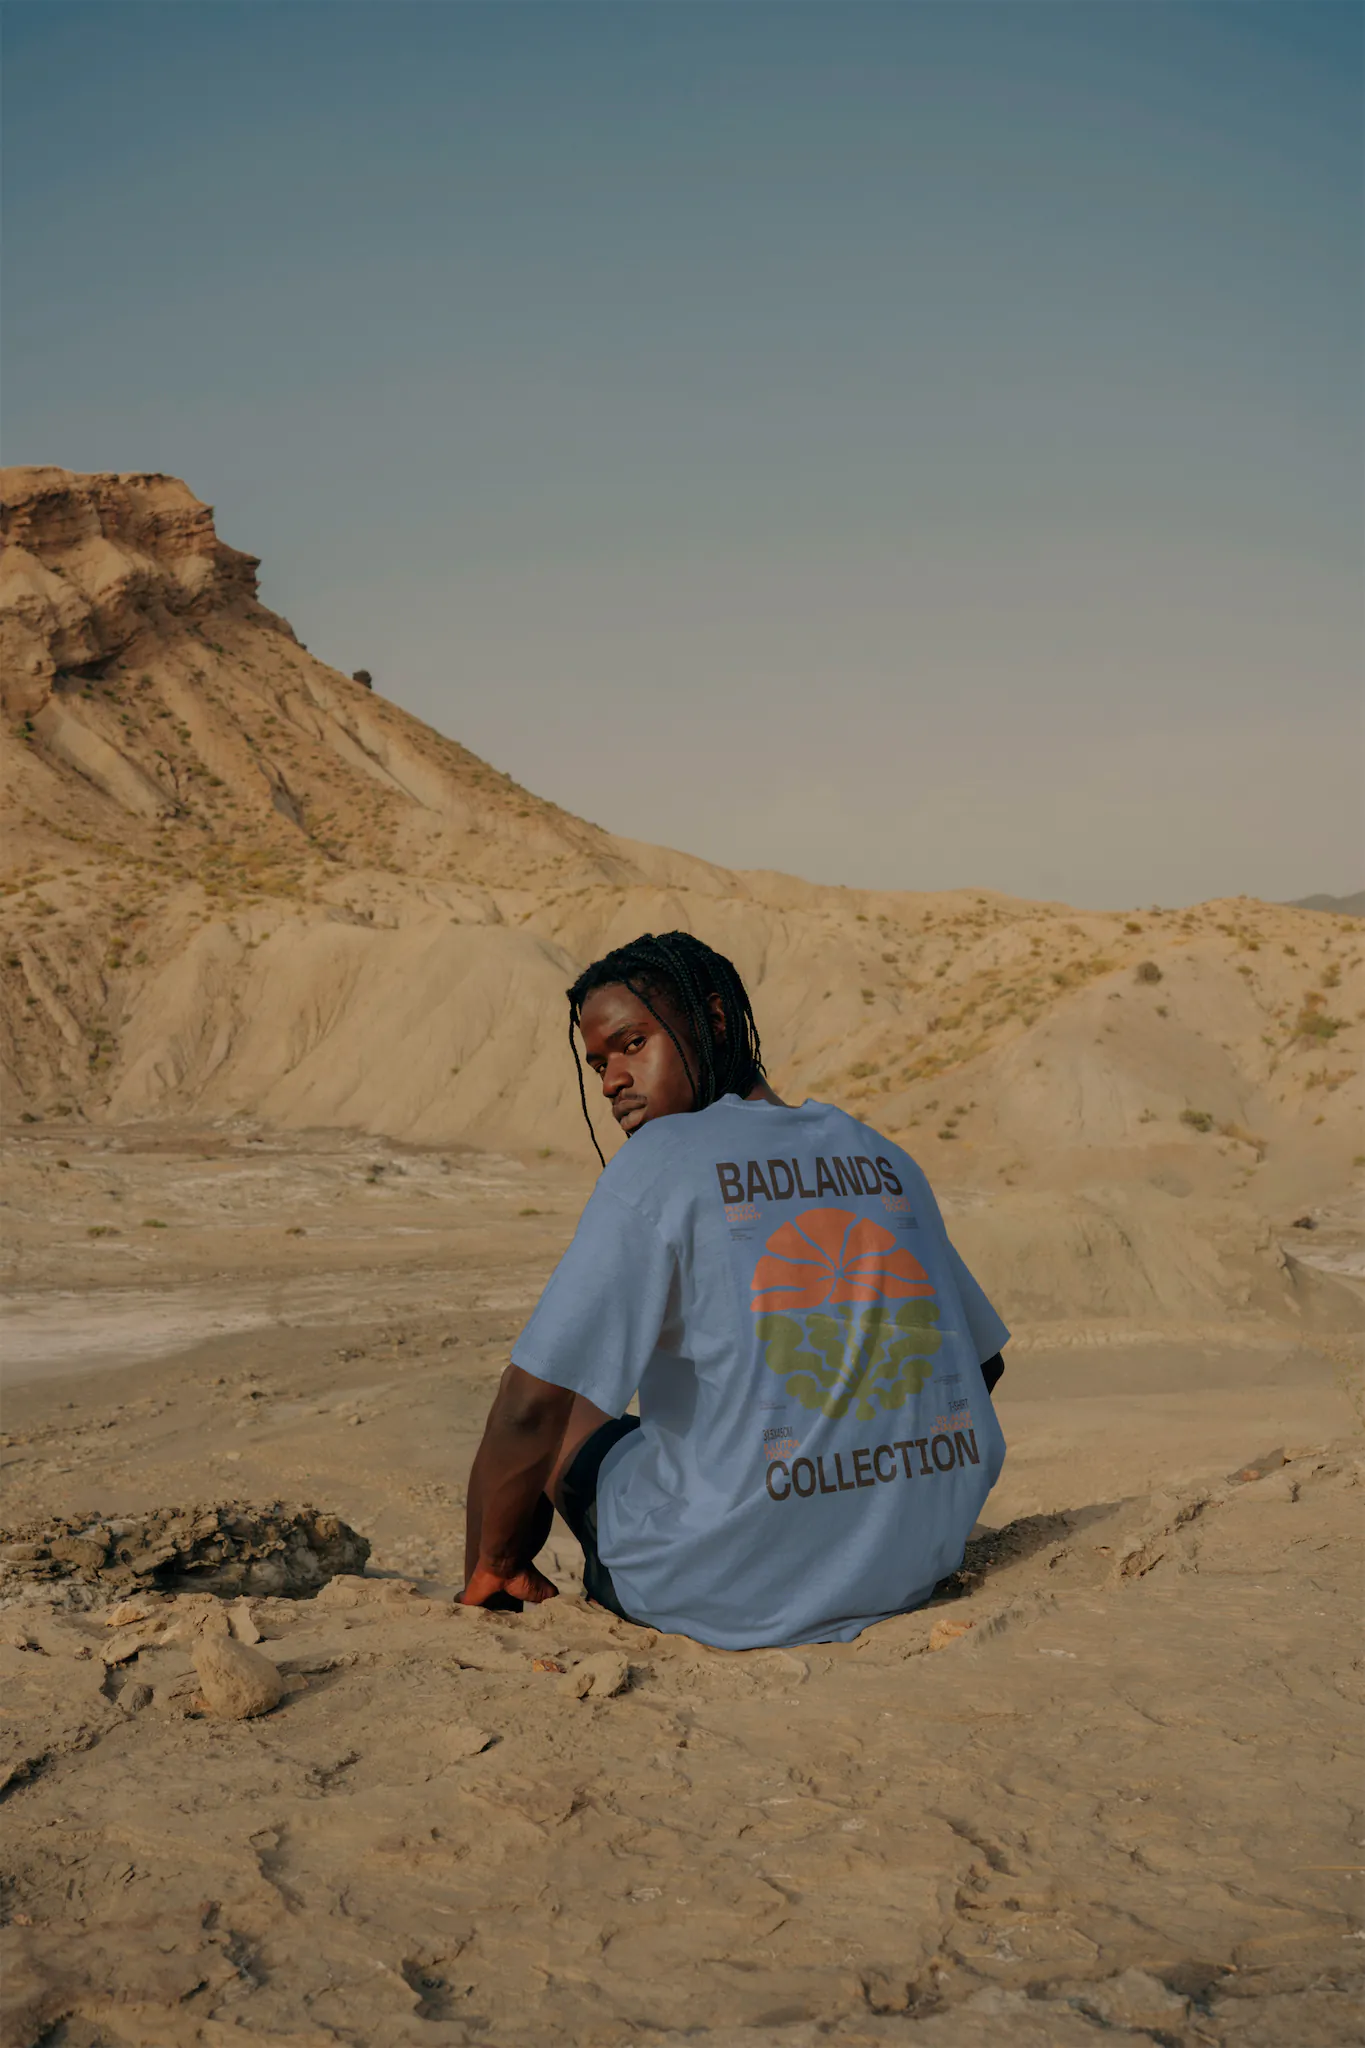 Black guy from behind sitting and wearing a t-shirt mock-up in a desert environment